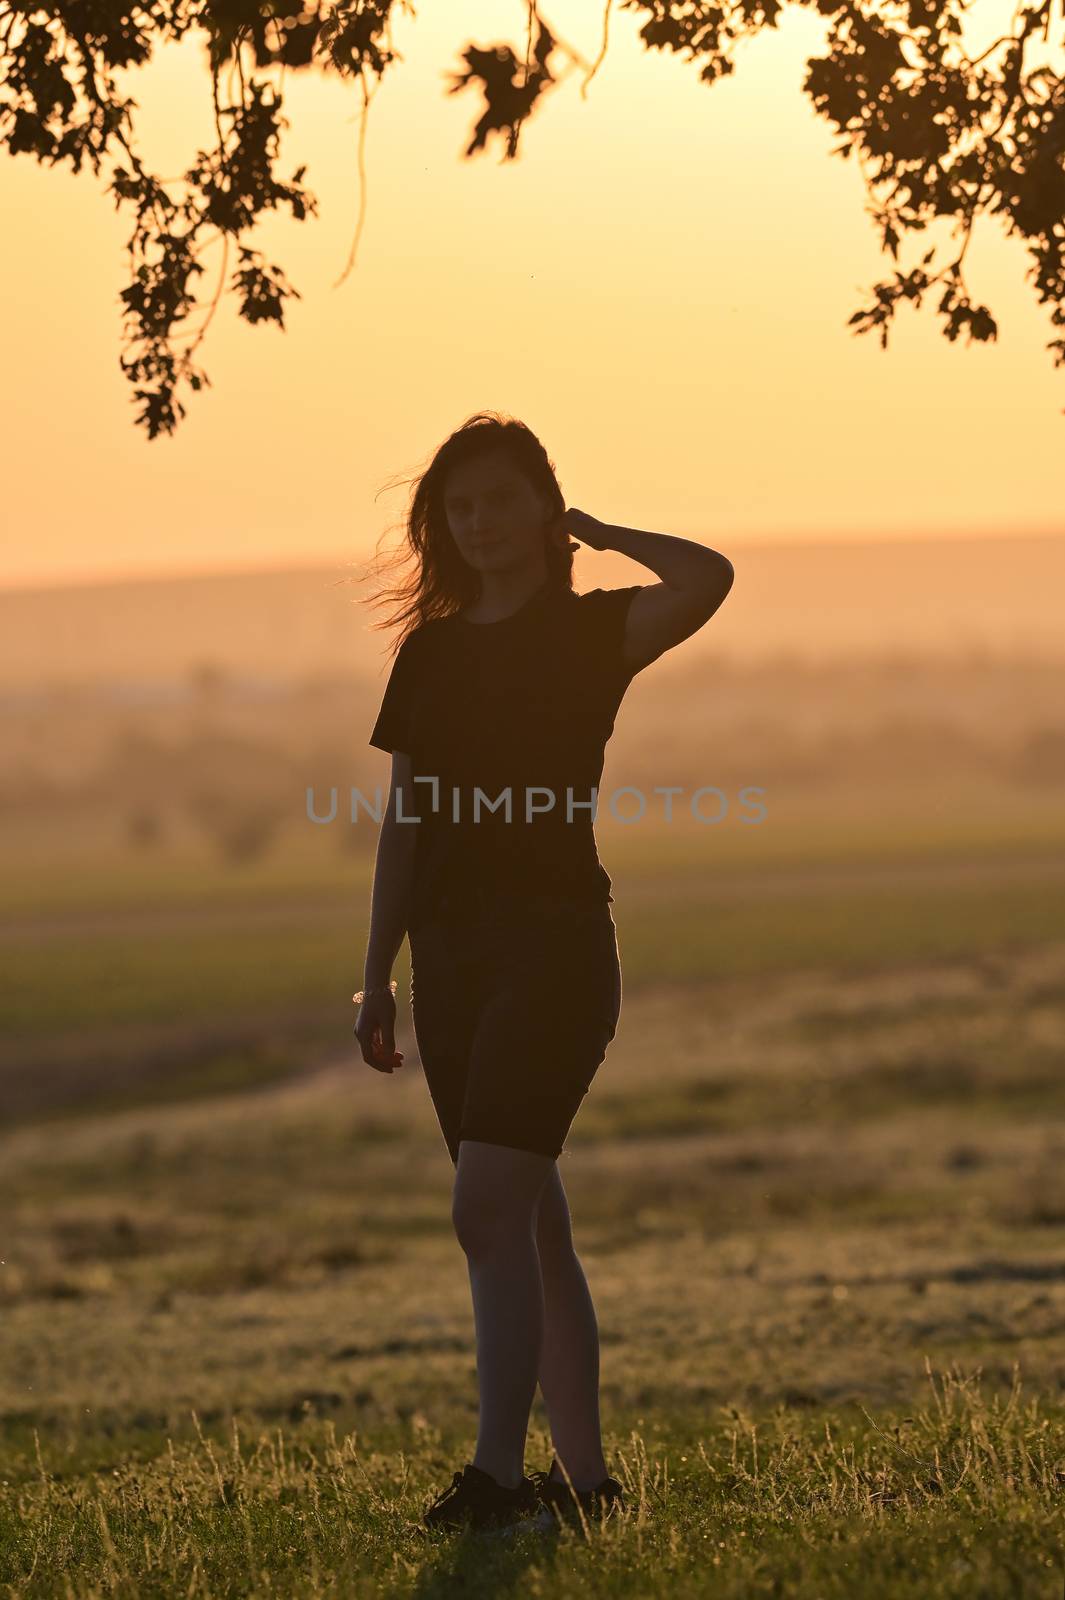 Young woman silhouette at sunset by mady70